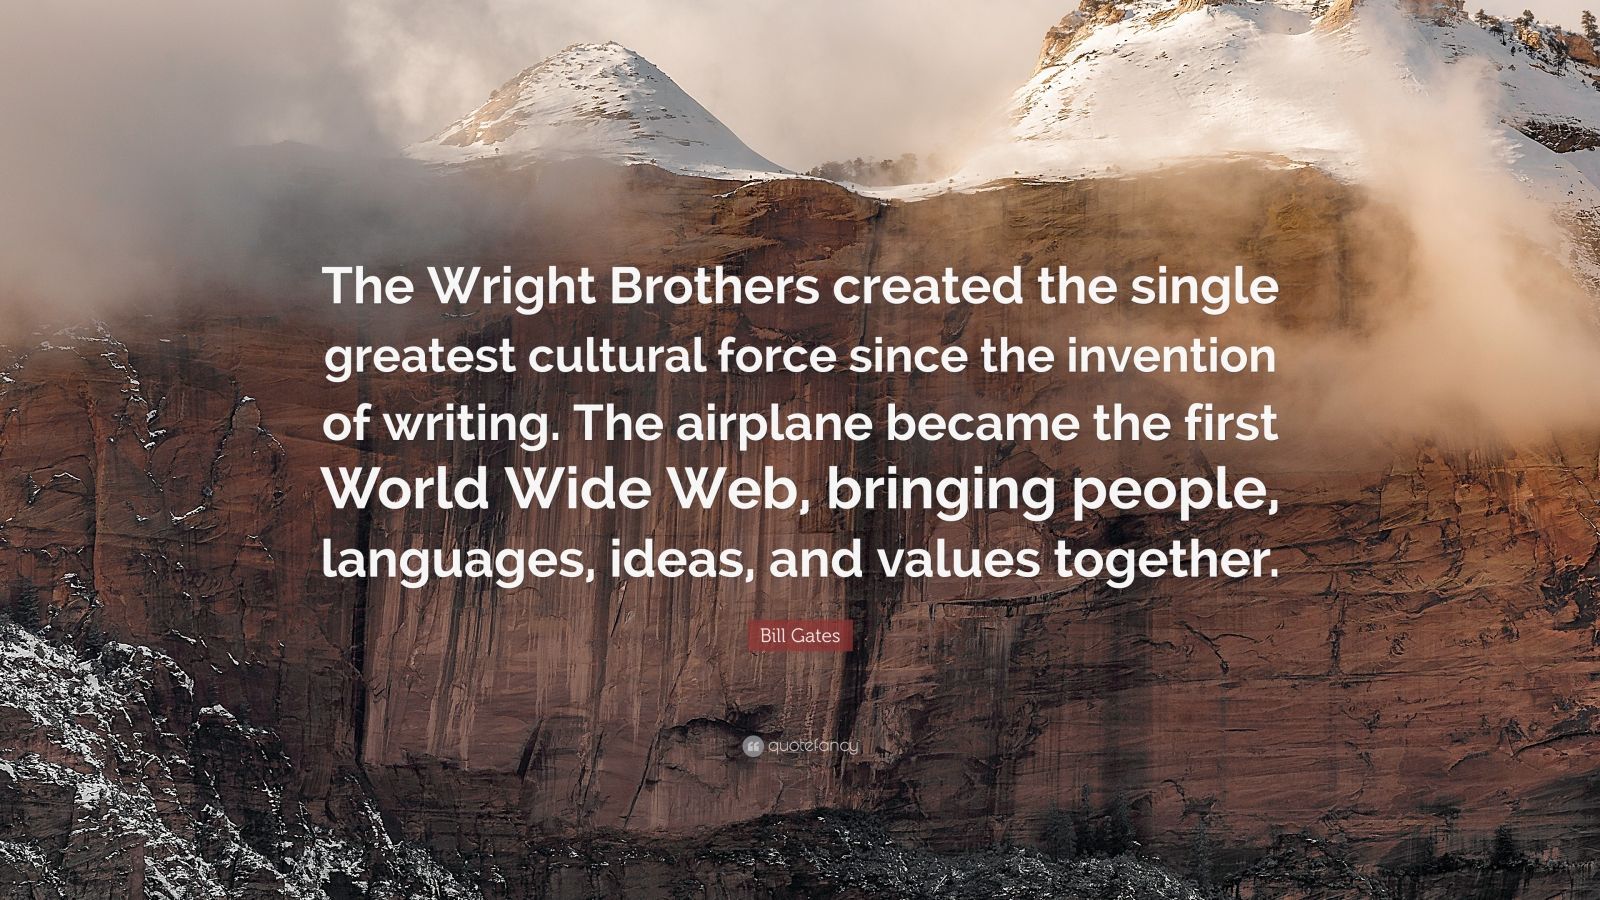 2223959 Bill Gates Quote The Wright Brothers created the single greatest